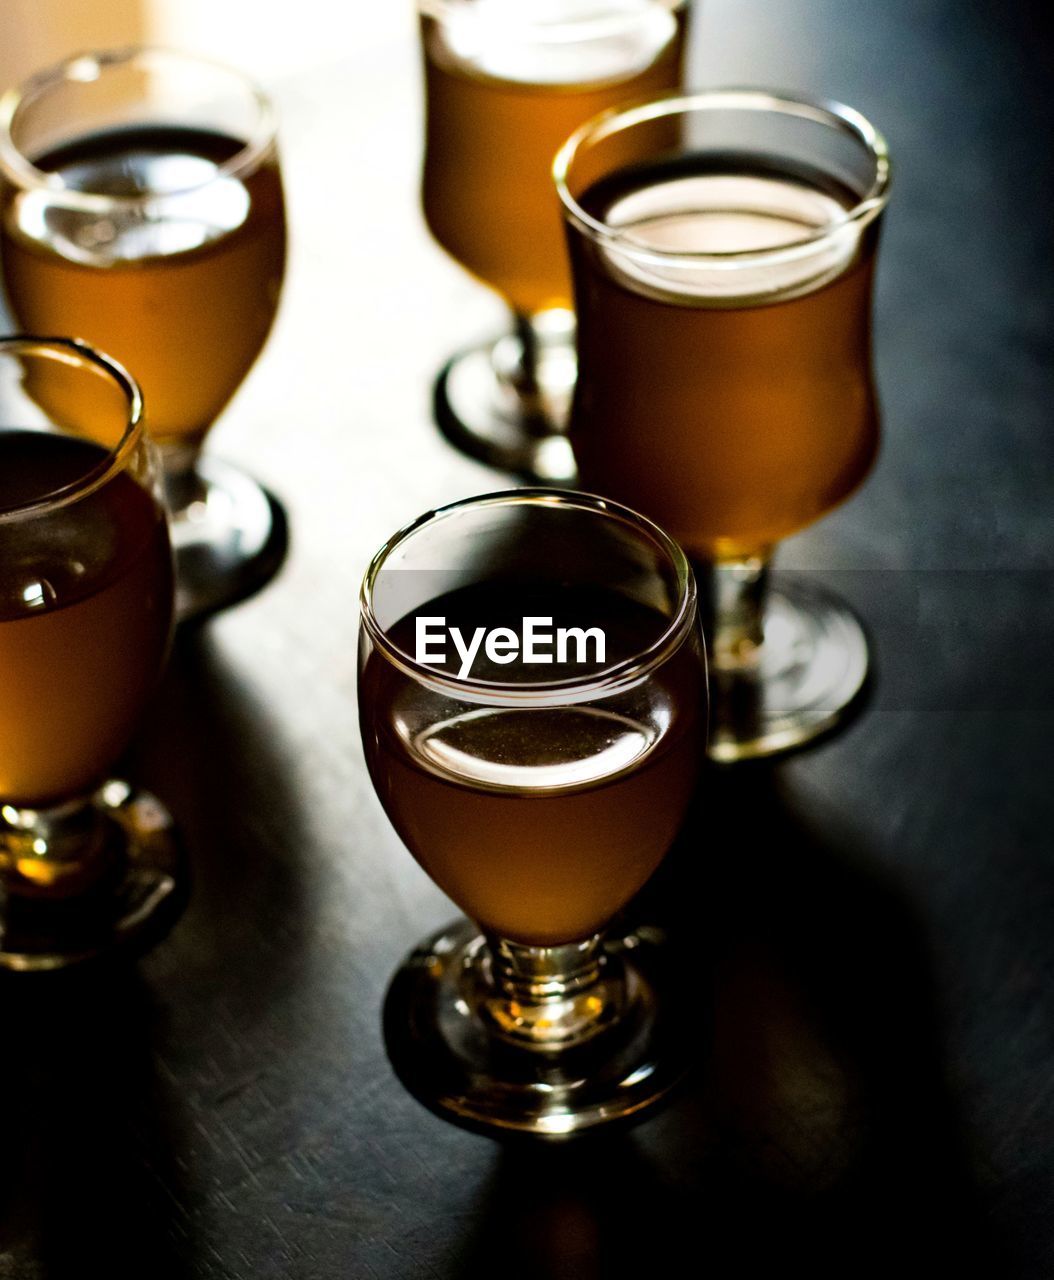 CLOSE-UP OF BEER GLASSES ON TABLE